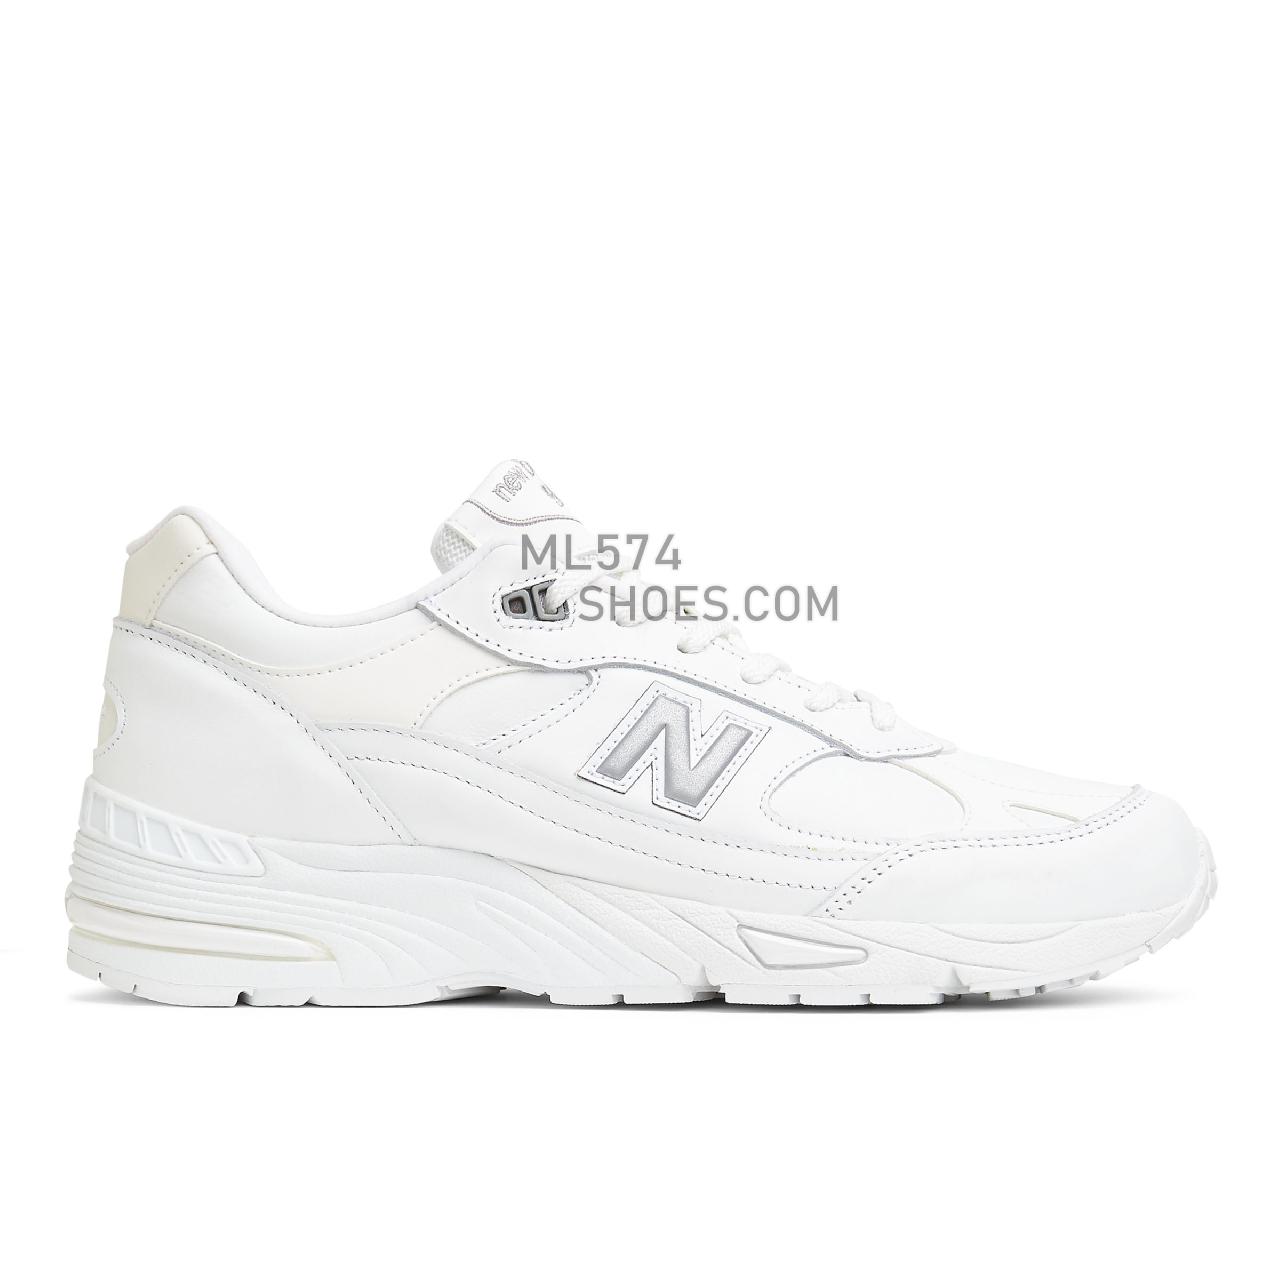 New Balance Made in UK 991 - Men's Made in USA And UK Sneakers - White with Grey - M991TW